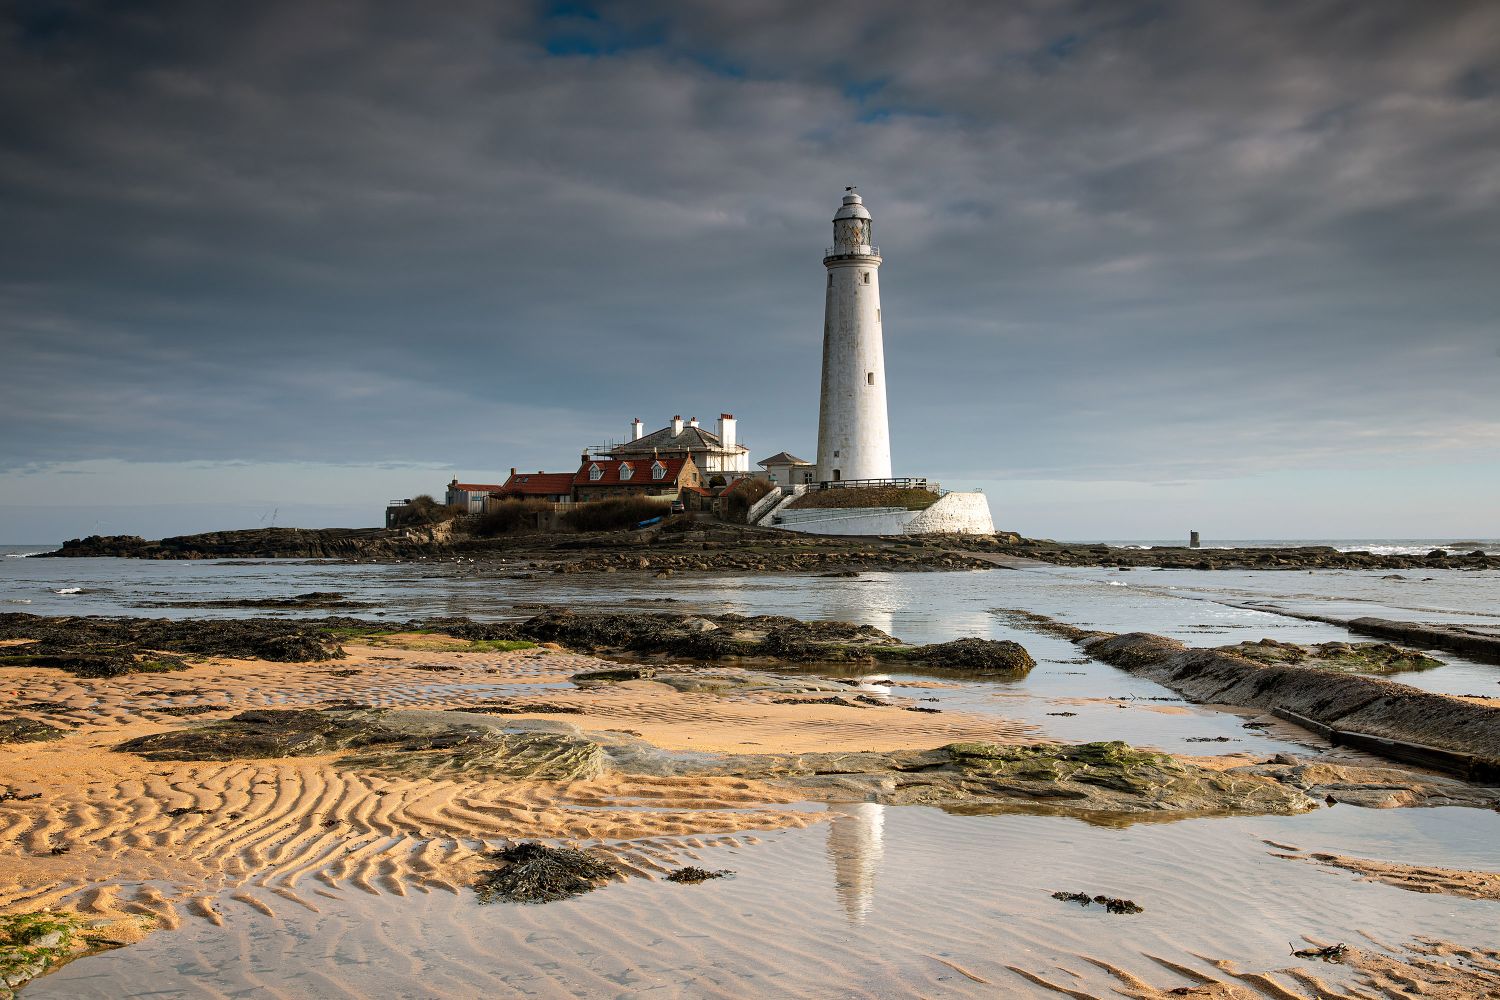 St Mary's Lighthouse in Whitley Bay, Northumberland